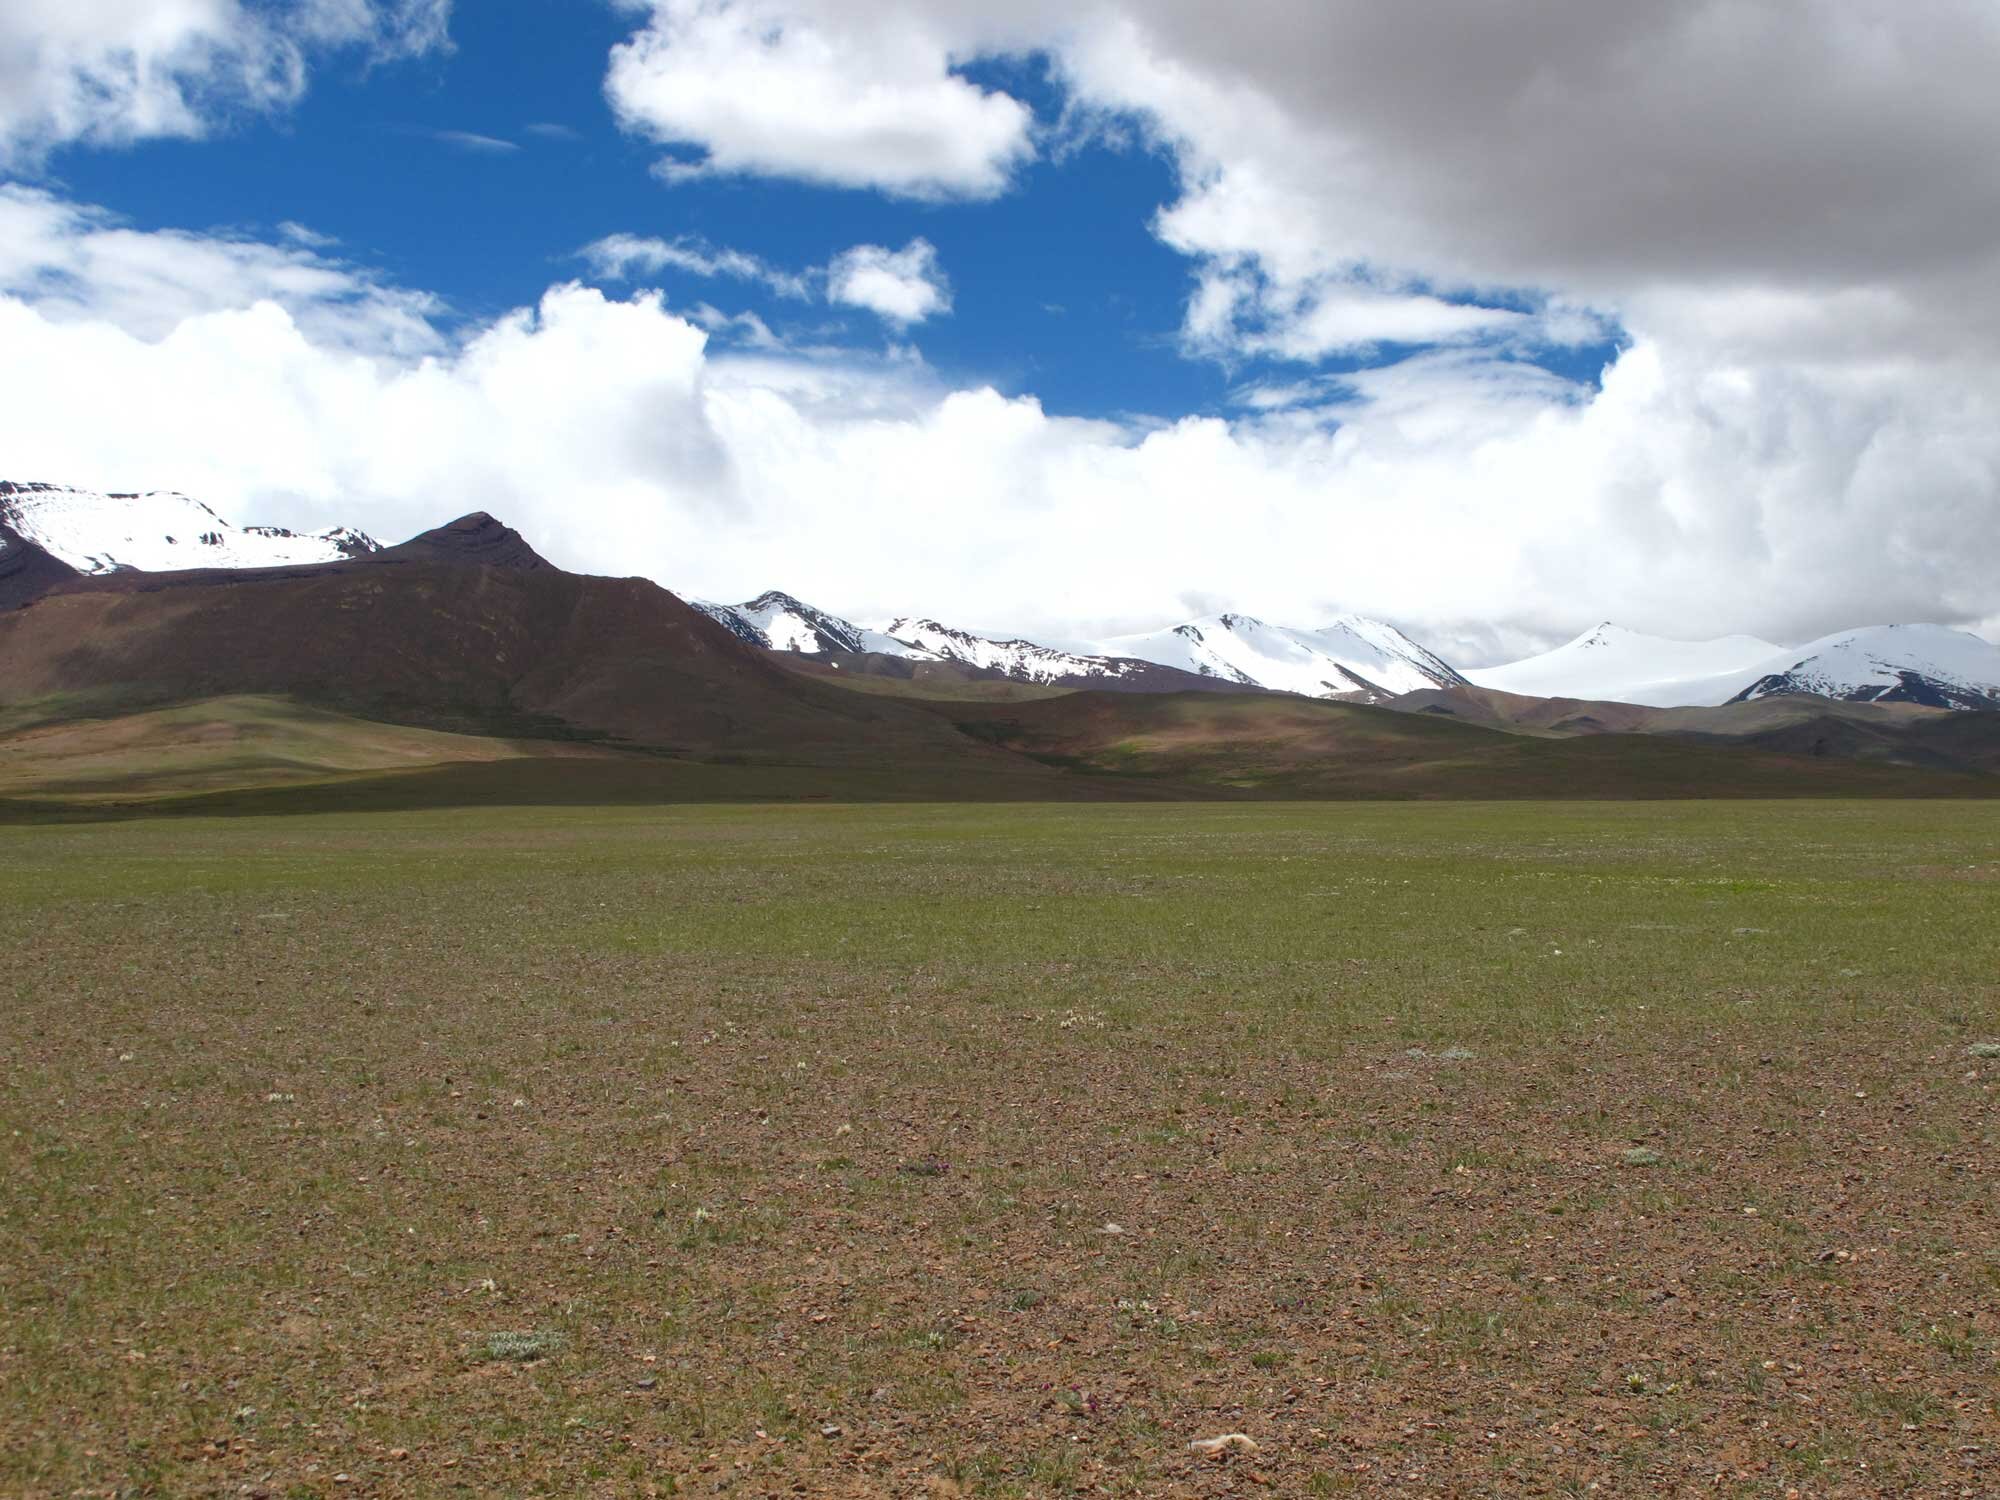 Denisovans or Homo sapiens: Who were the first to settle permanently on the Tibetan Plateau?